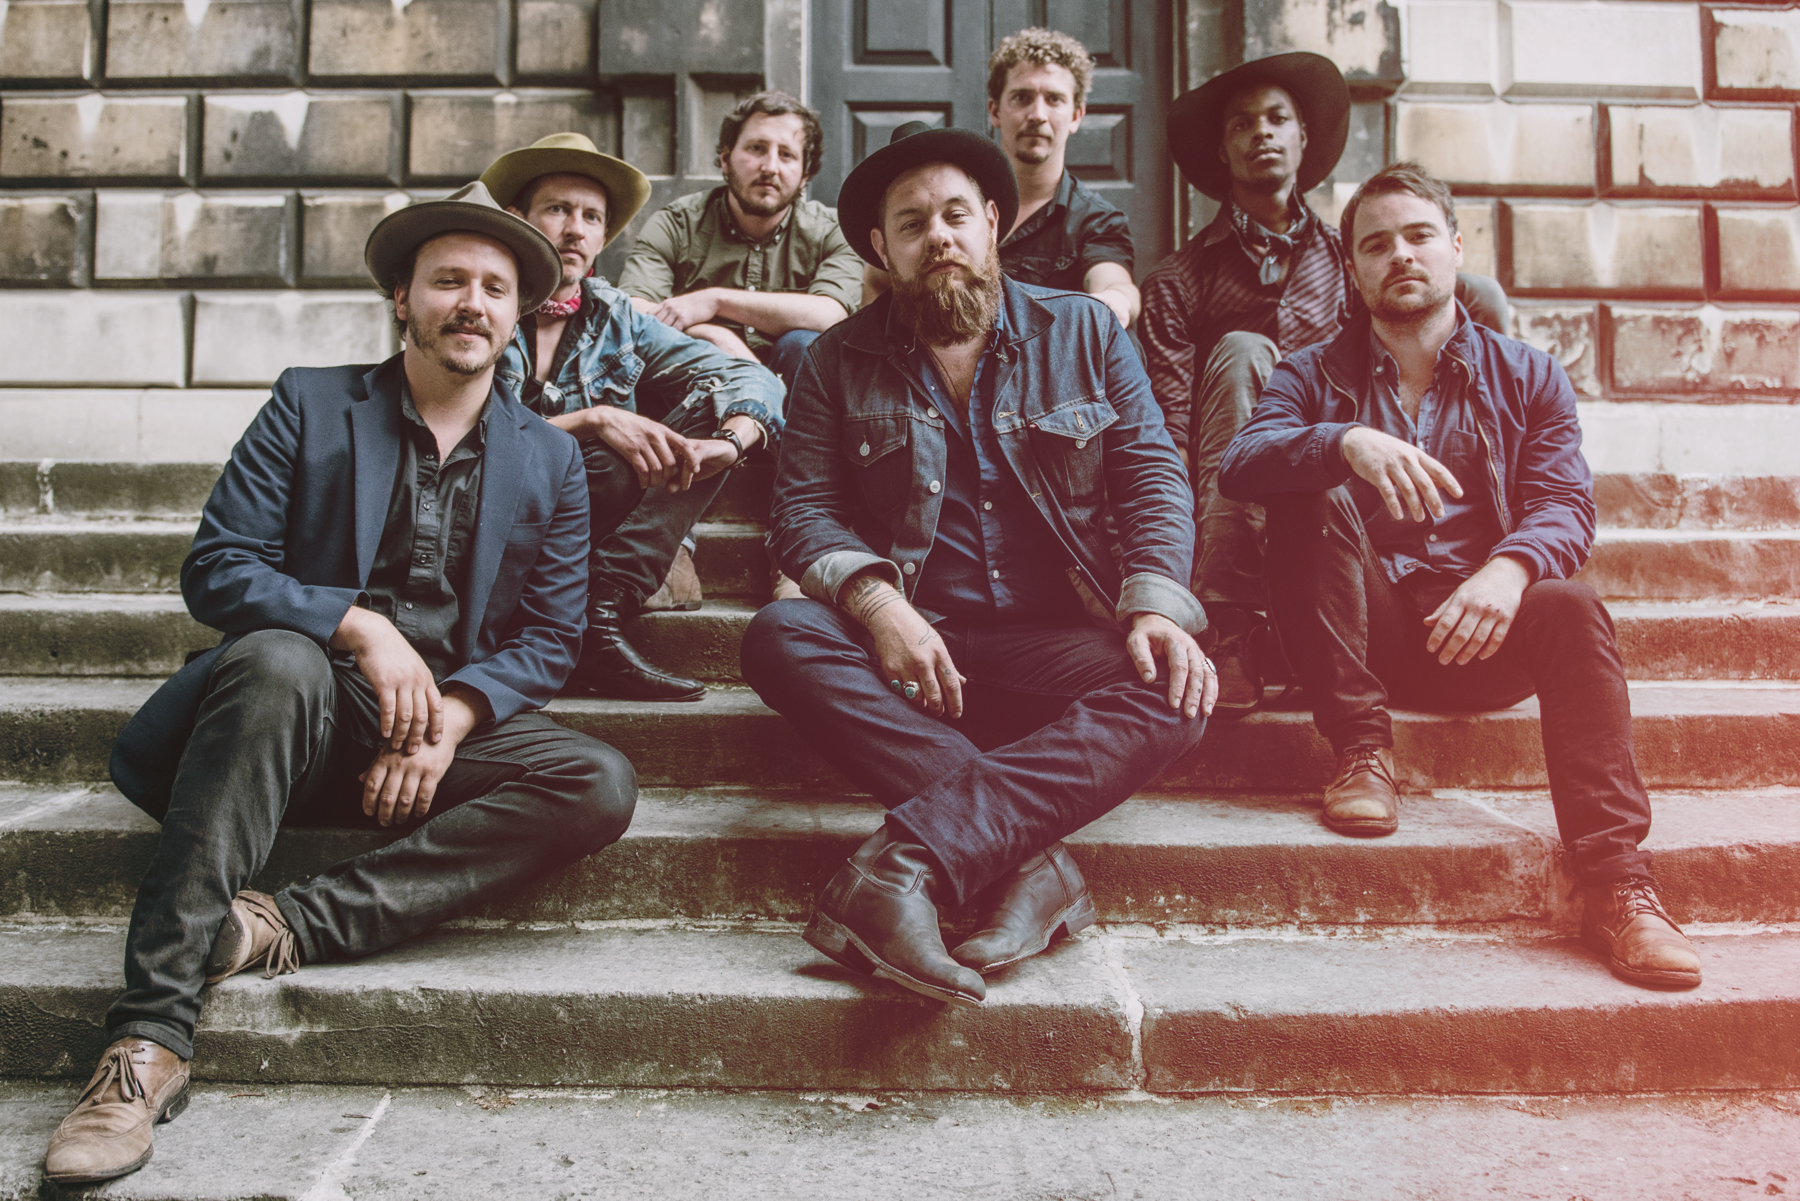 Nathaniel Rateliff: Chasing the real